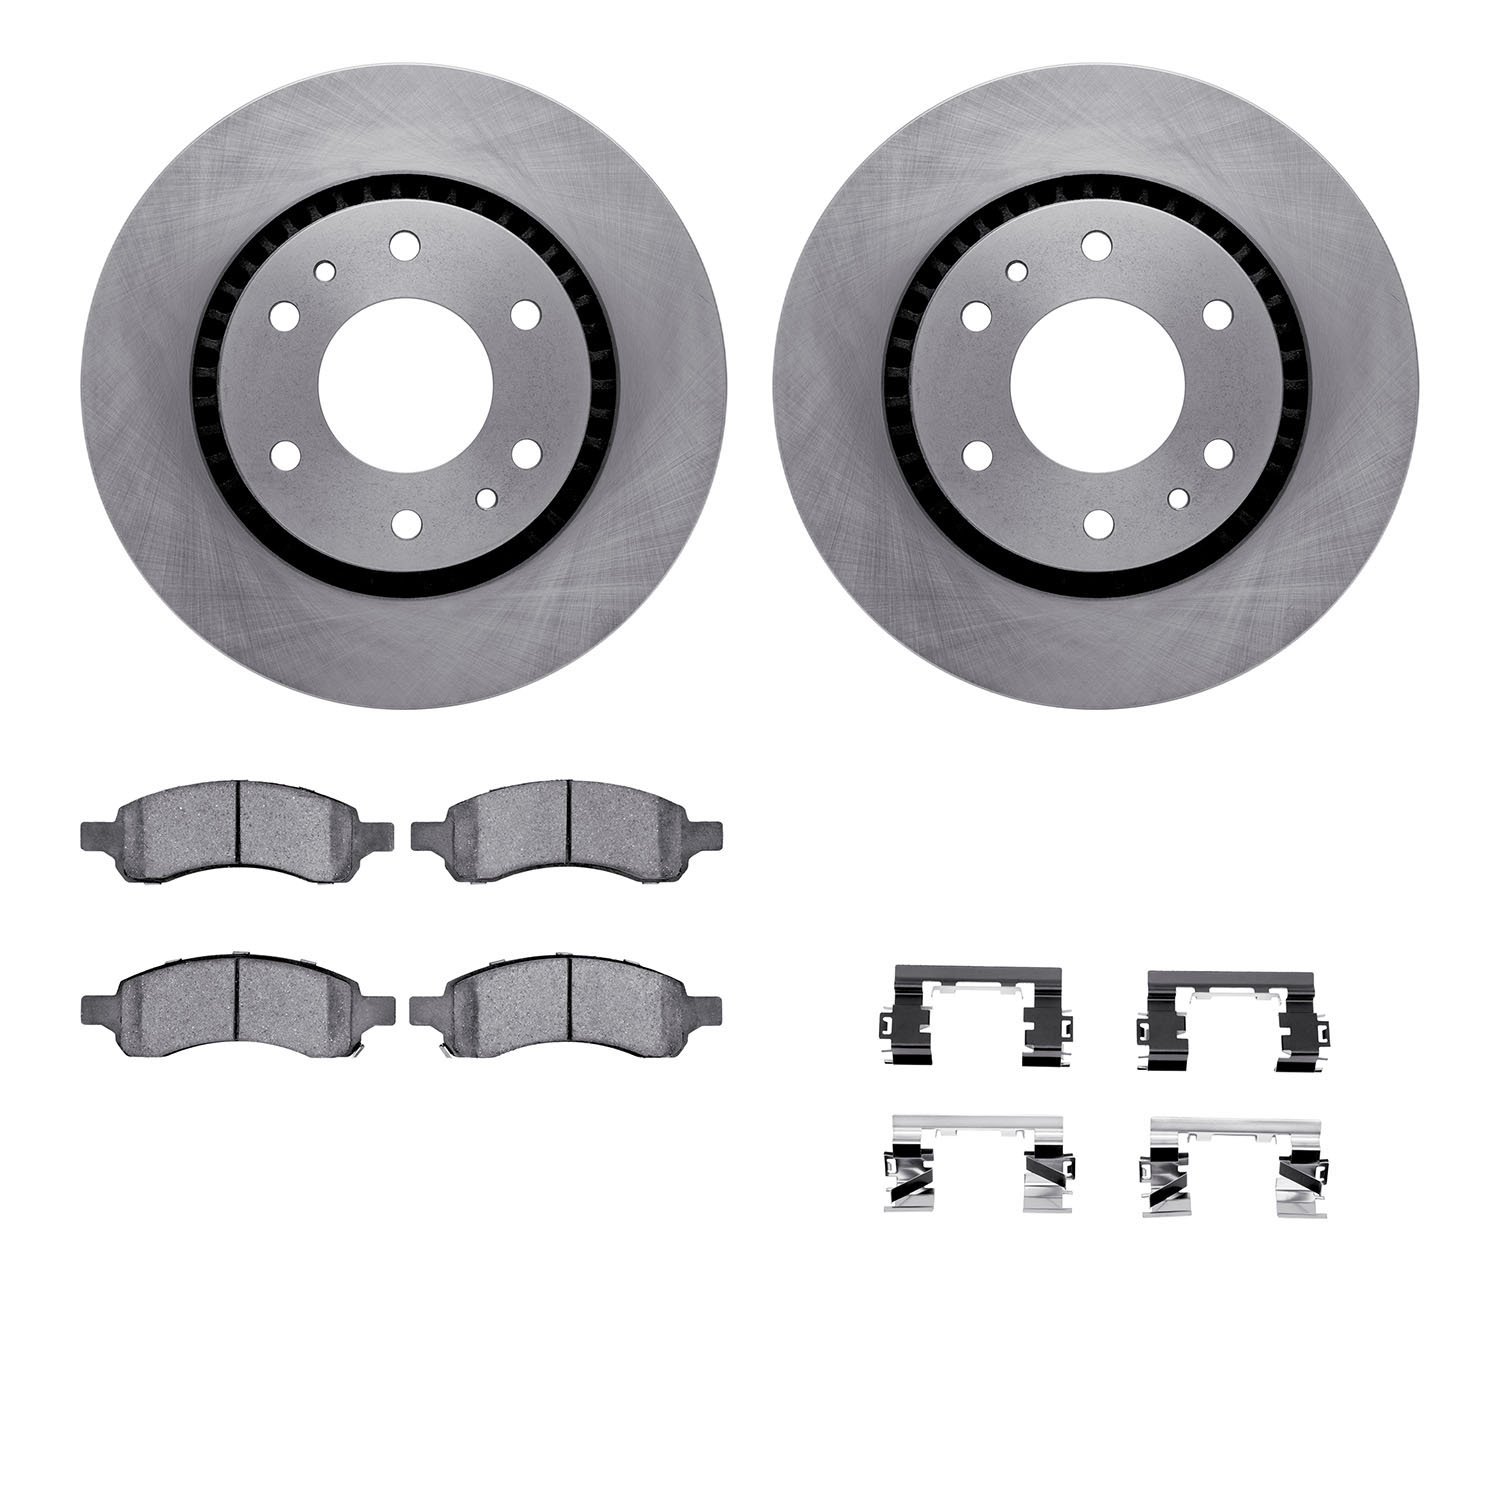 6412-48112 Brake Rotors with Ultimate-Duty Brake Pads Kit & Hardware, 2006-2009 GM, Position: Front